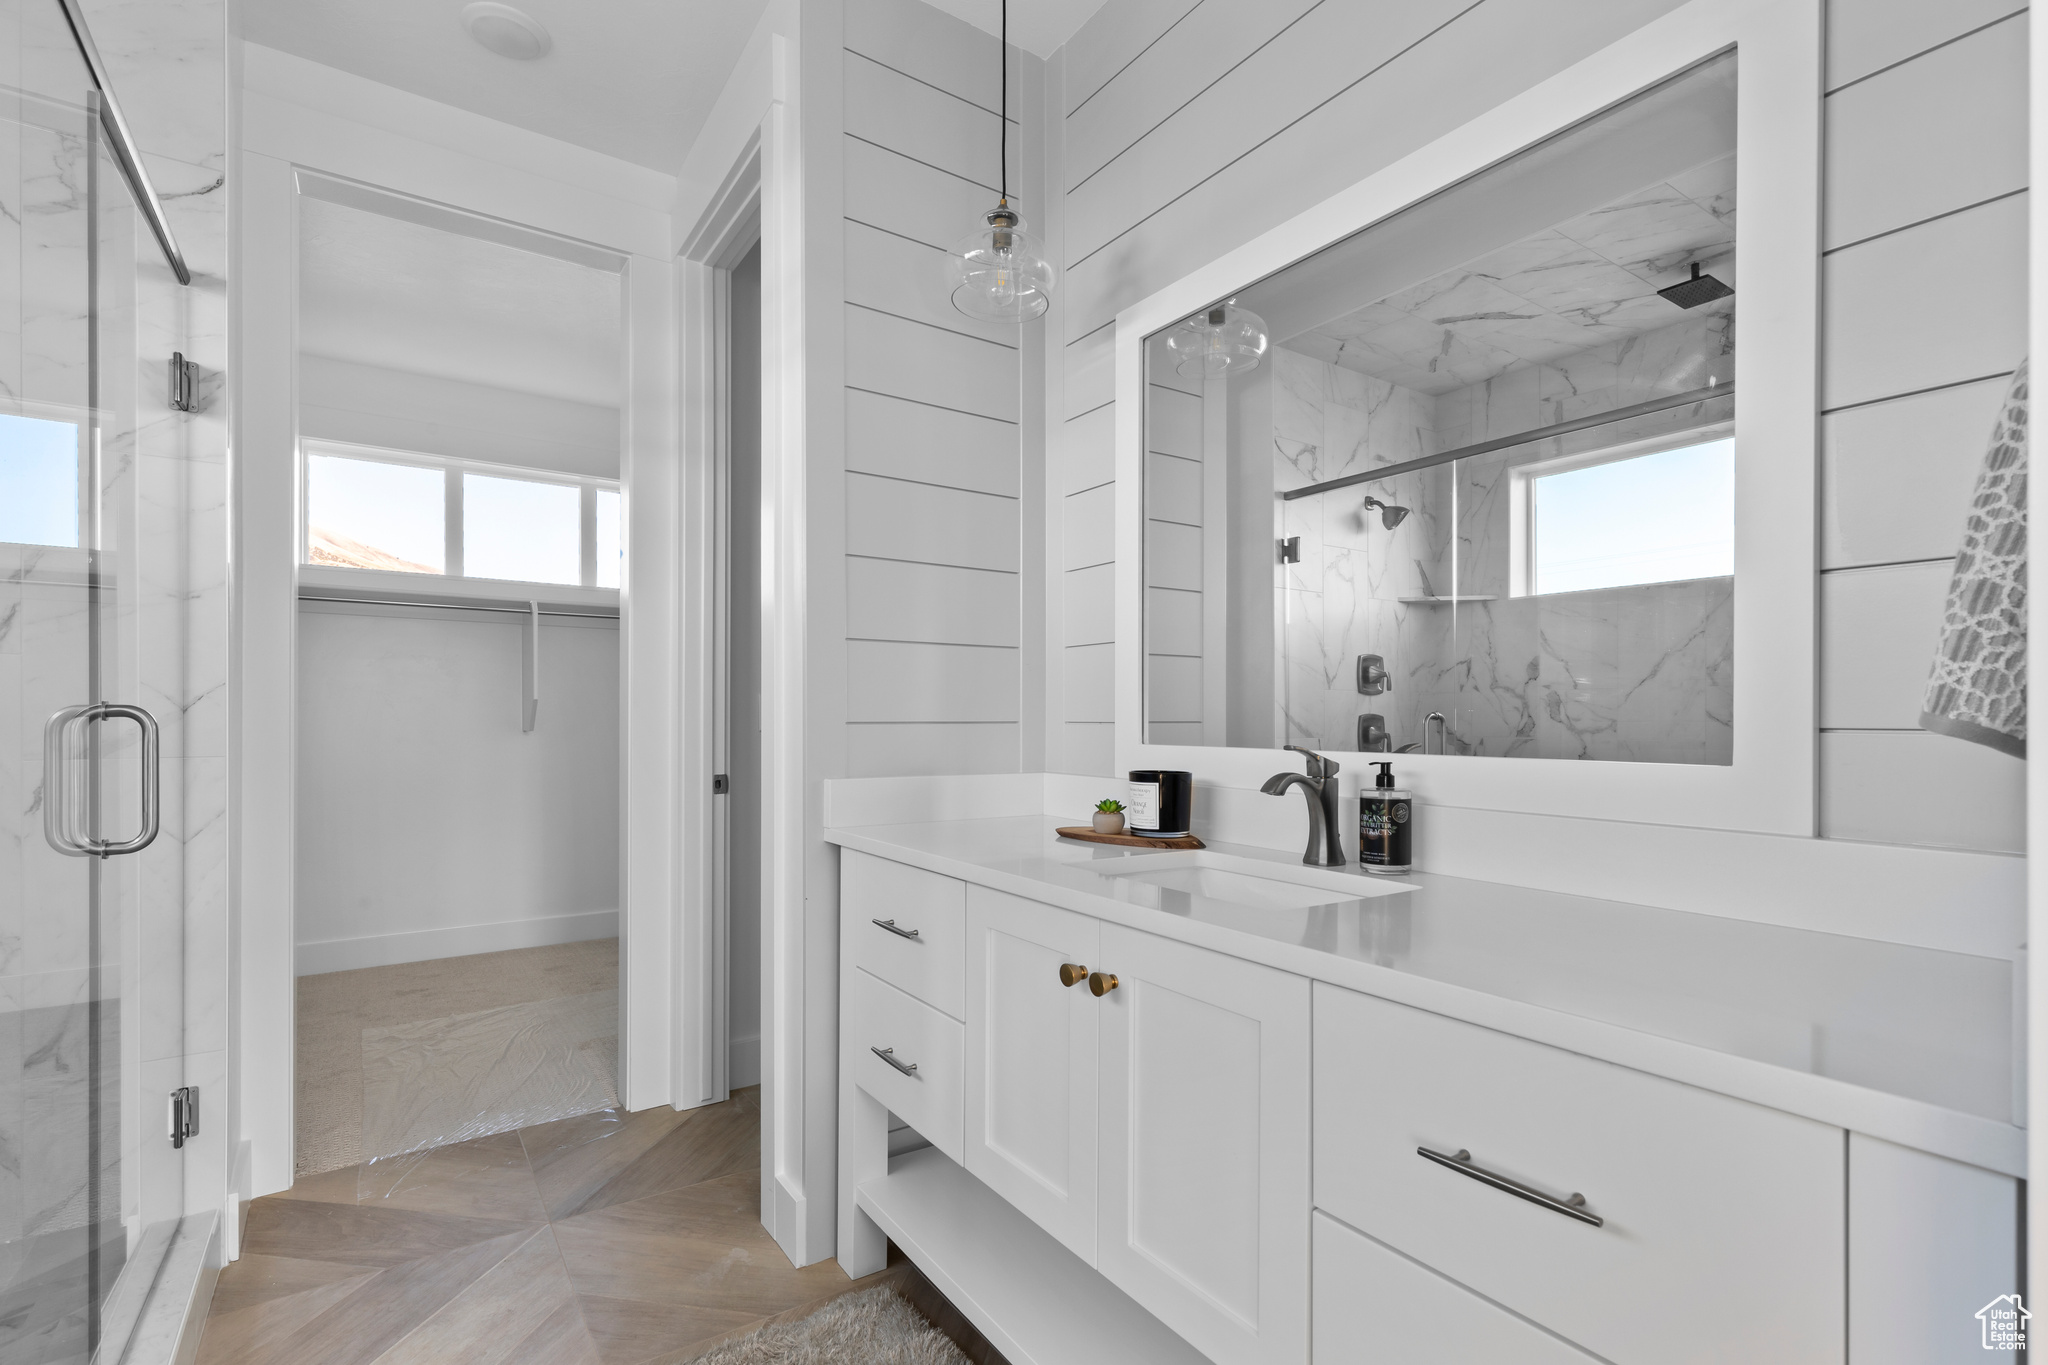 Bathroom featuring vanity with extensive cabinet space, parquet floors, and an enclosed shower